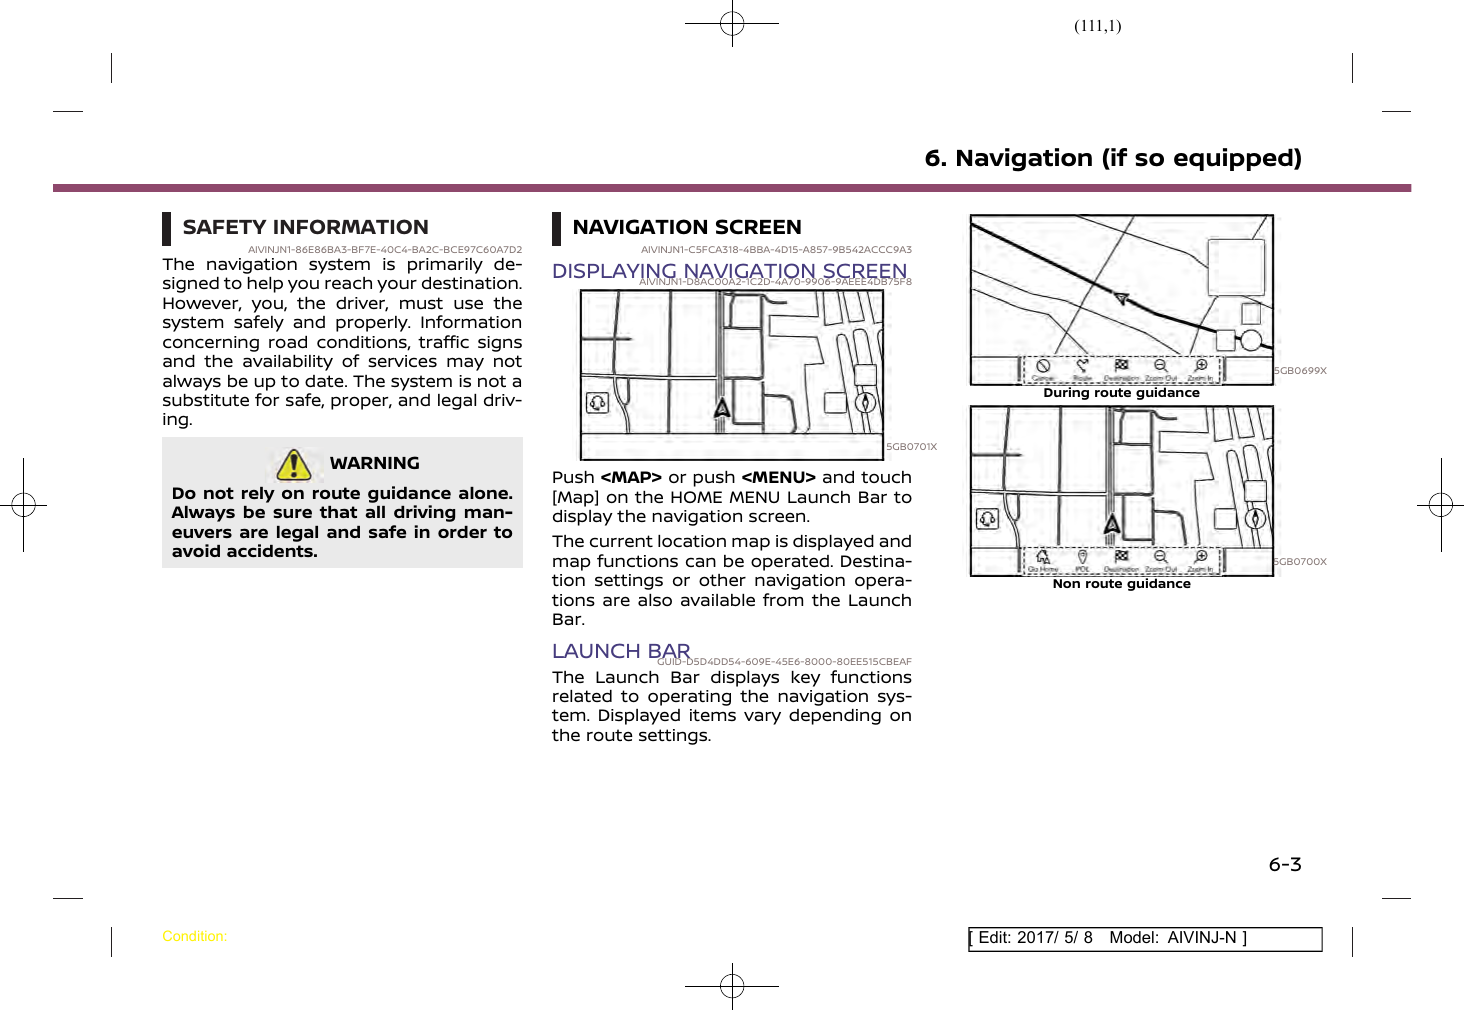 Page 111 of Robert Bosch Car Multimedia AIVICMFB0 Navigation System with Bluetooth and WLAN User Manual